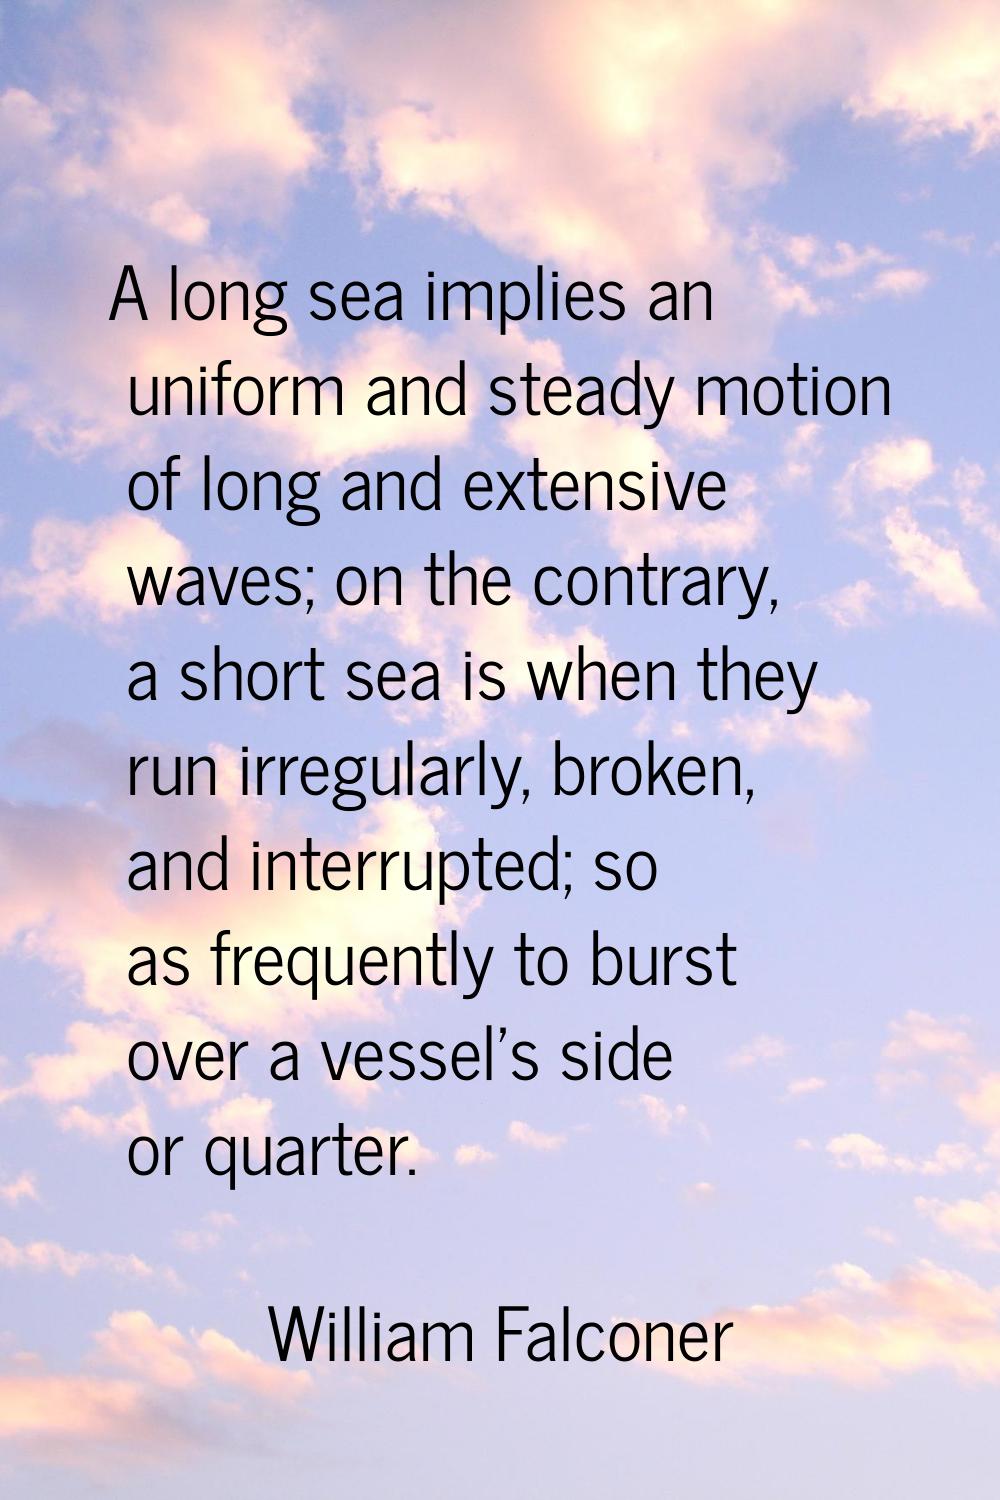 A long sea implies an uniform and steady motion of long and extensive waves; on the contrary, a sho